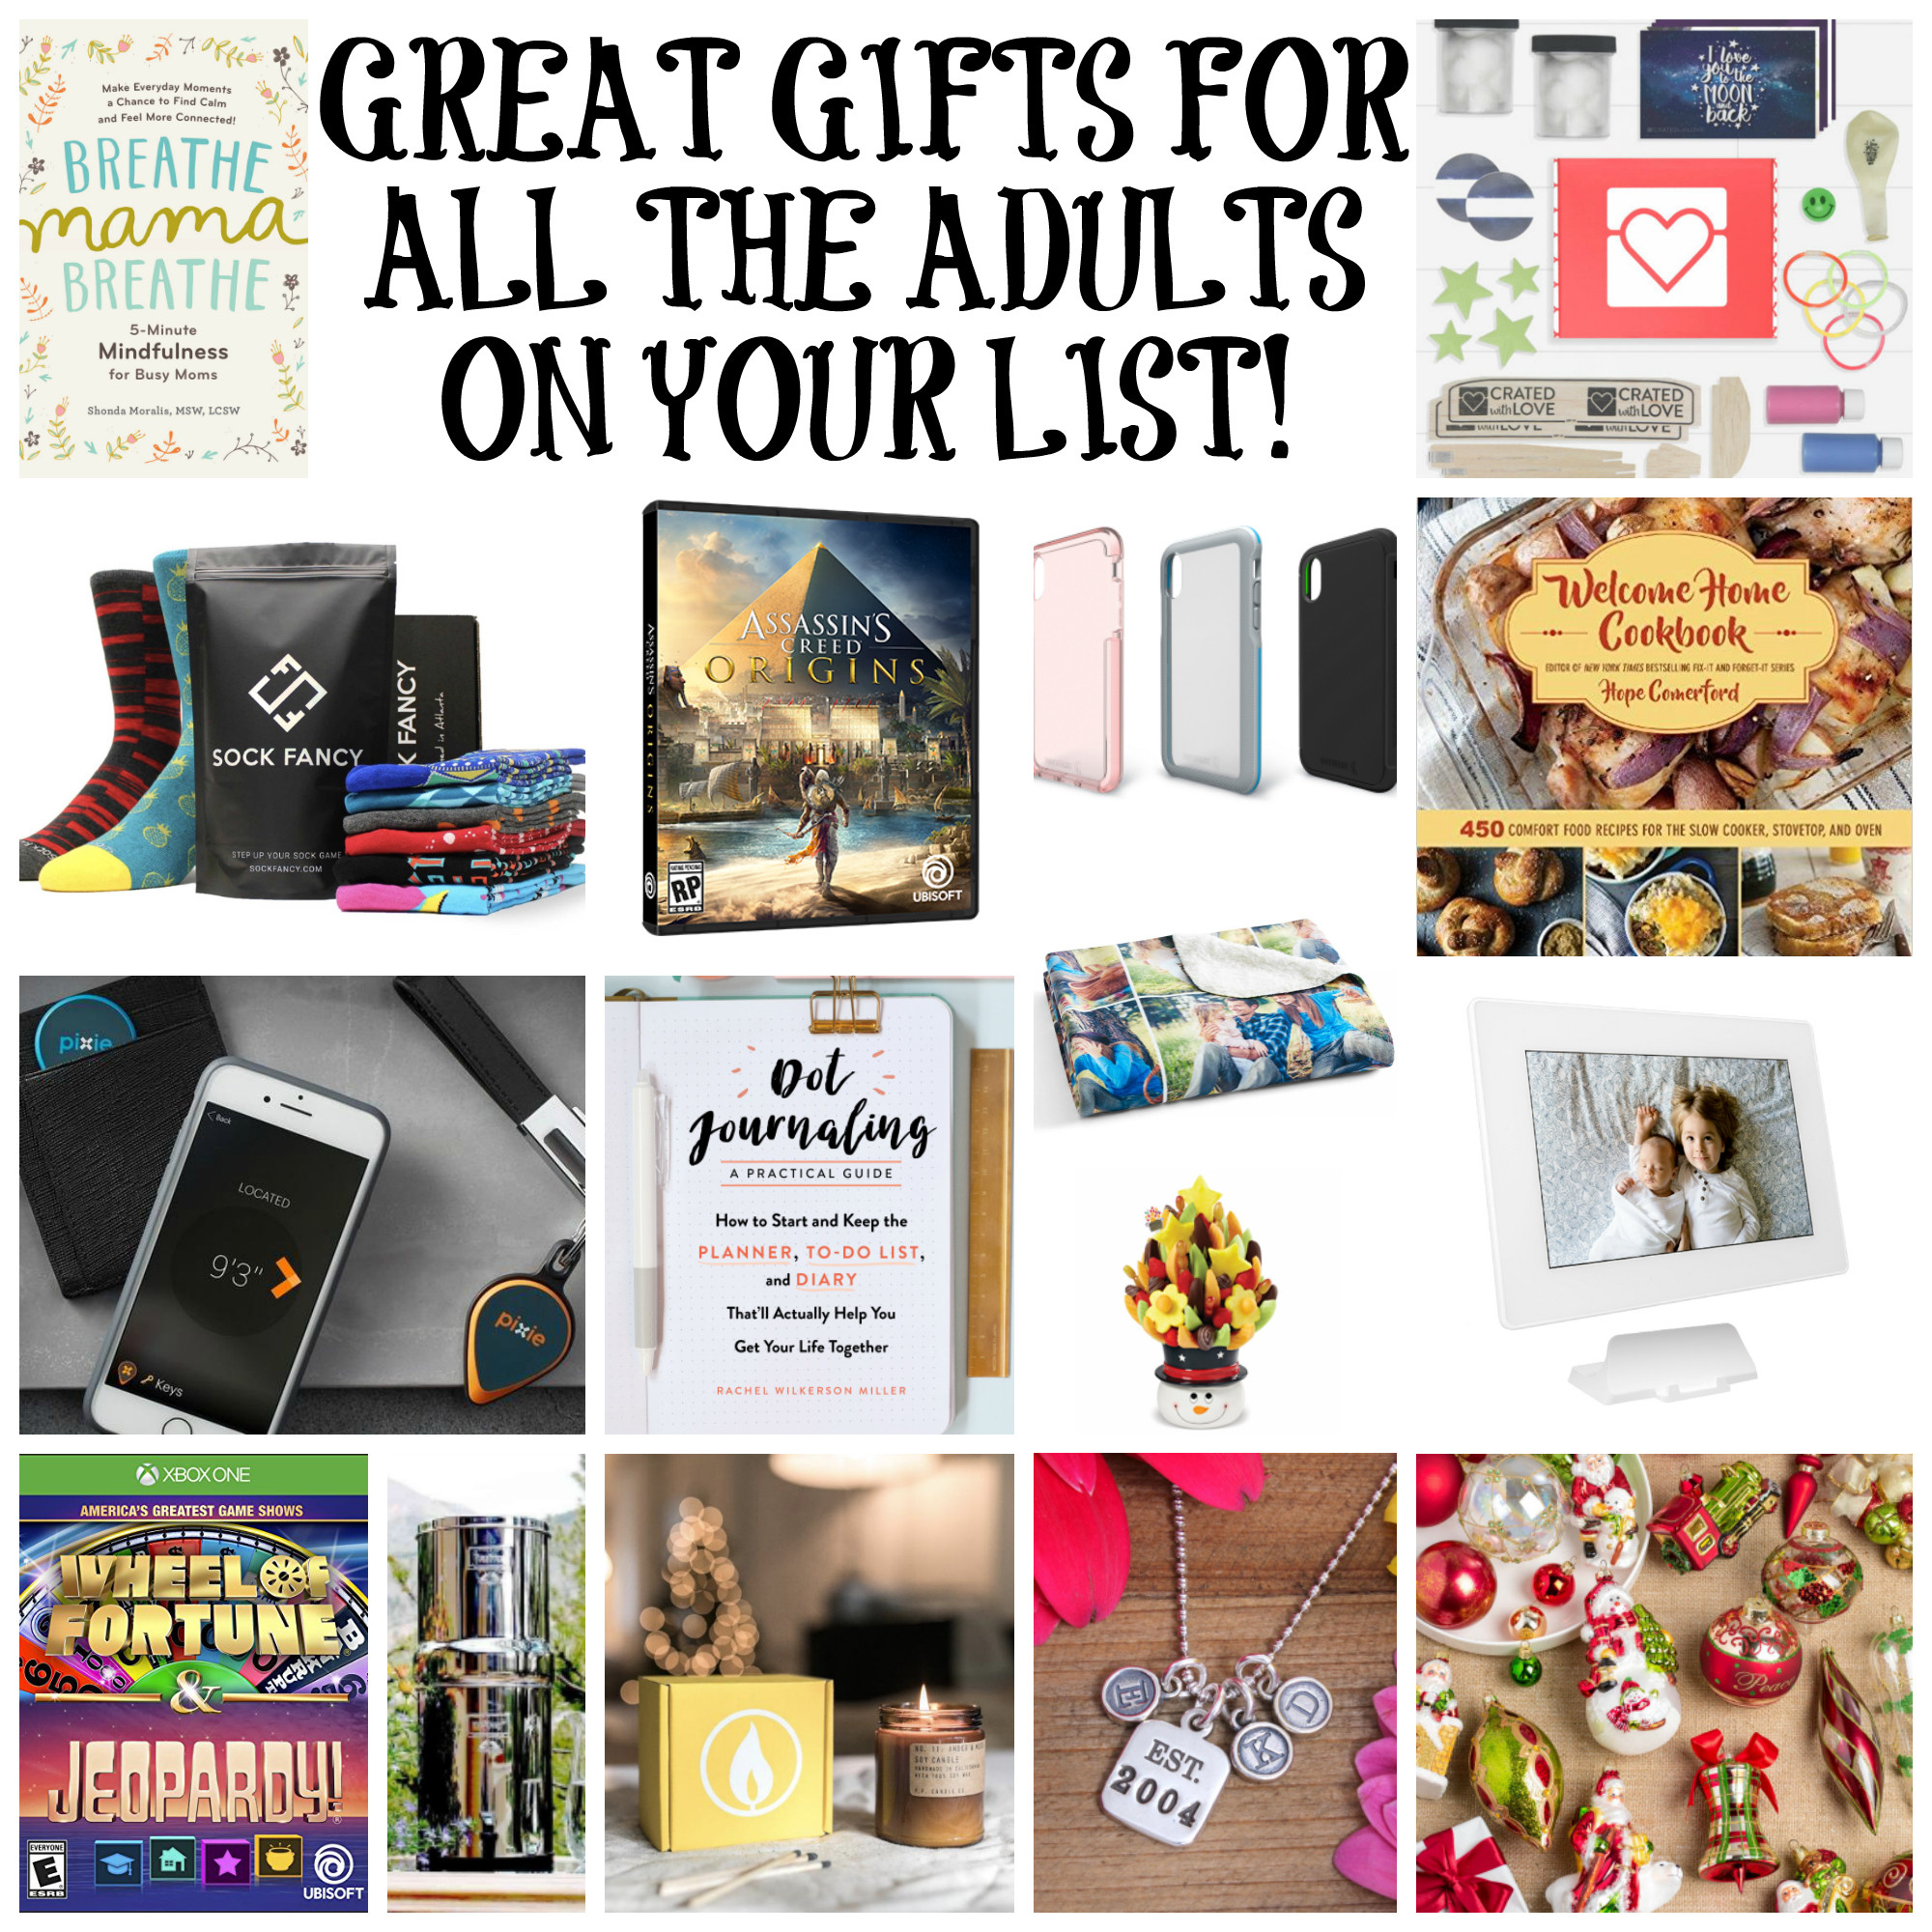 Adult Gift Ideas
 Gift Ideas For All The Adults Your Shopping List